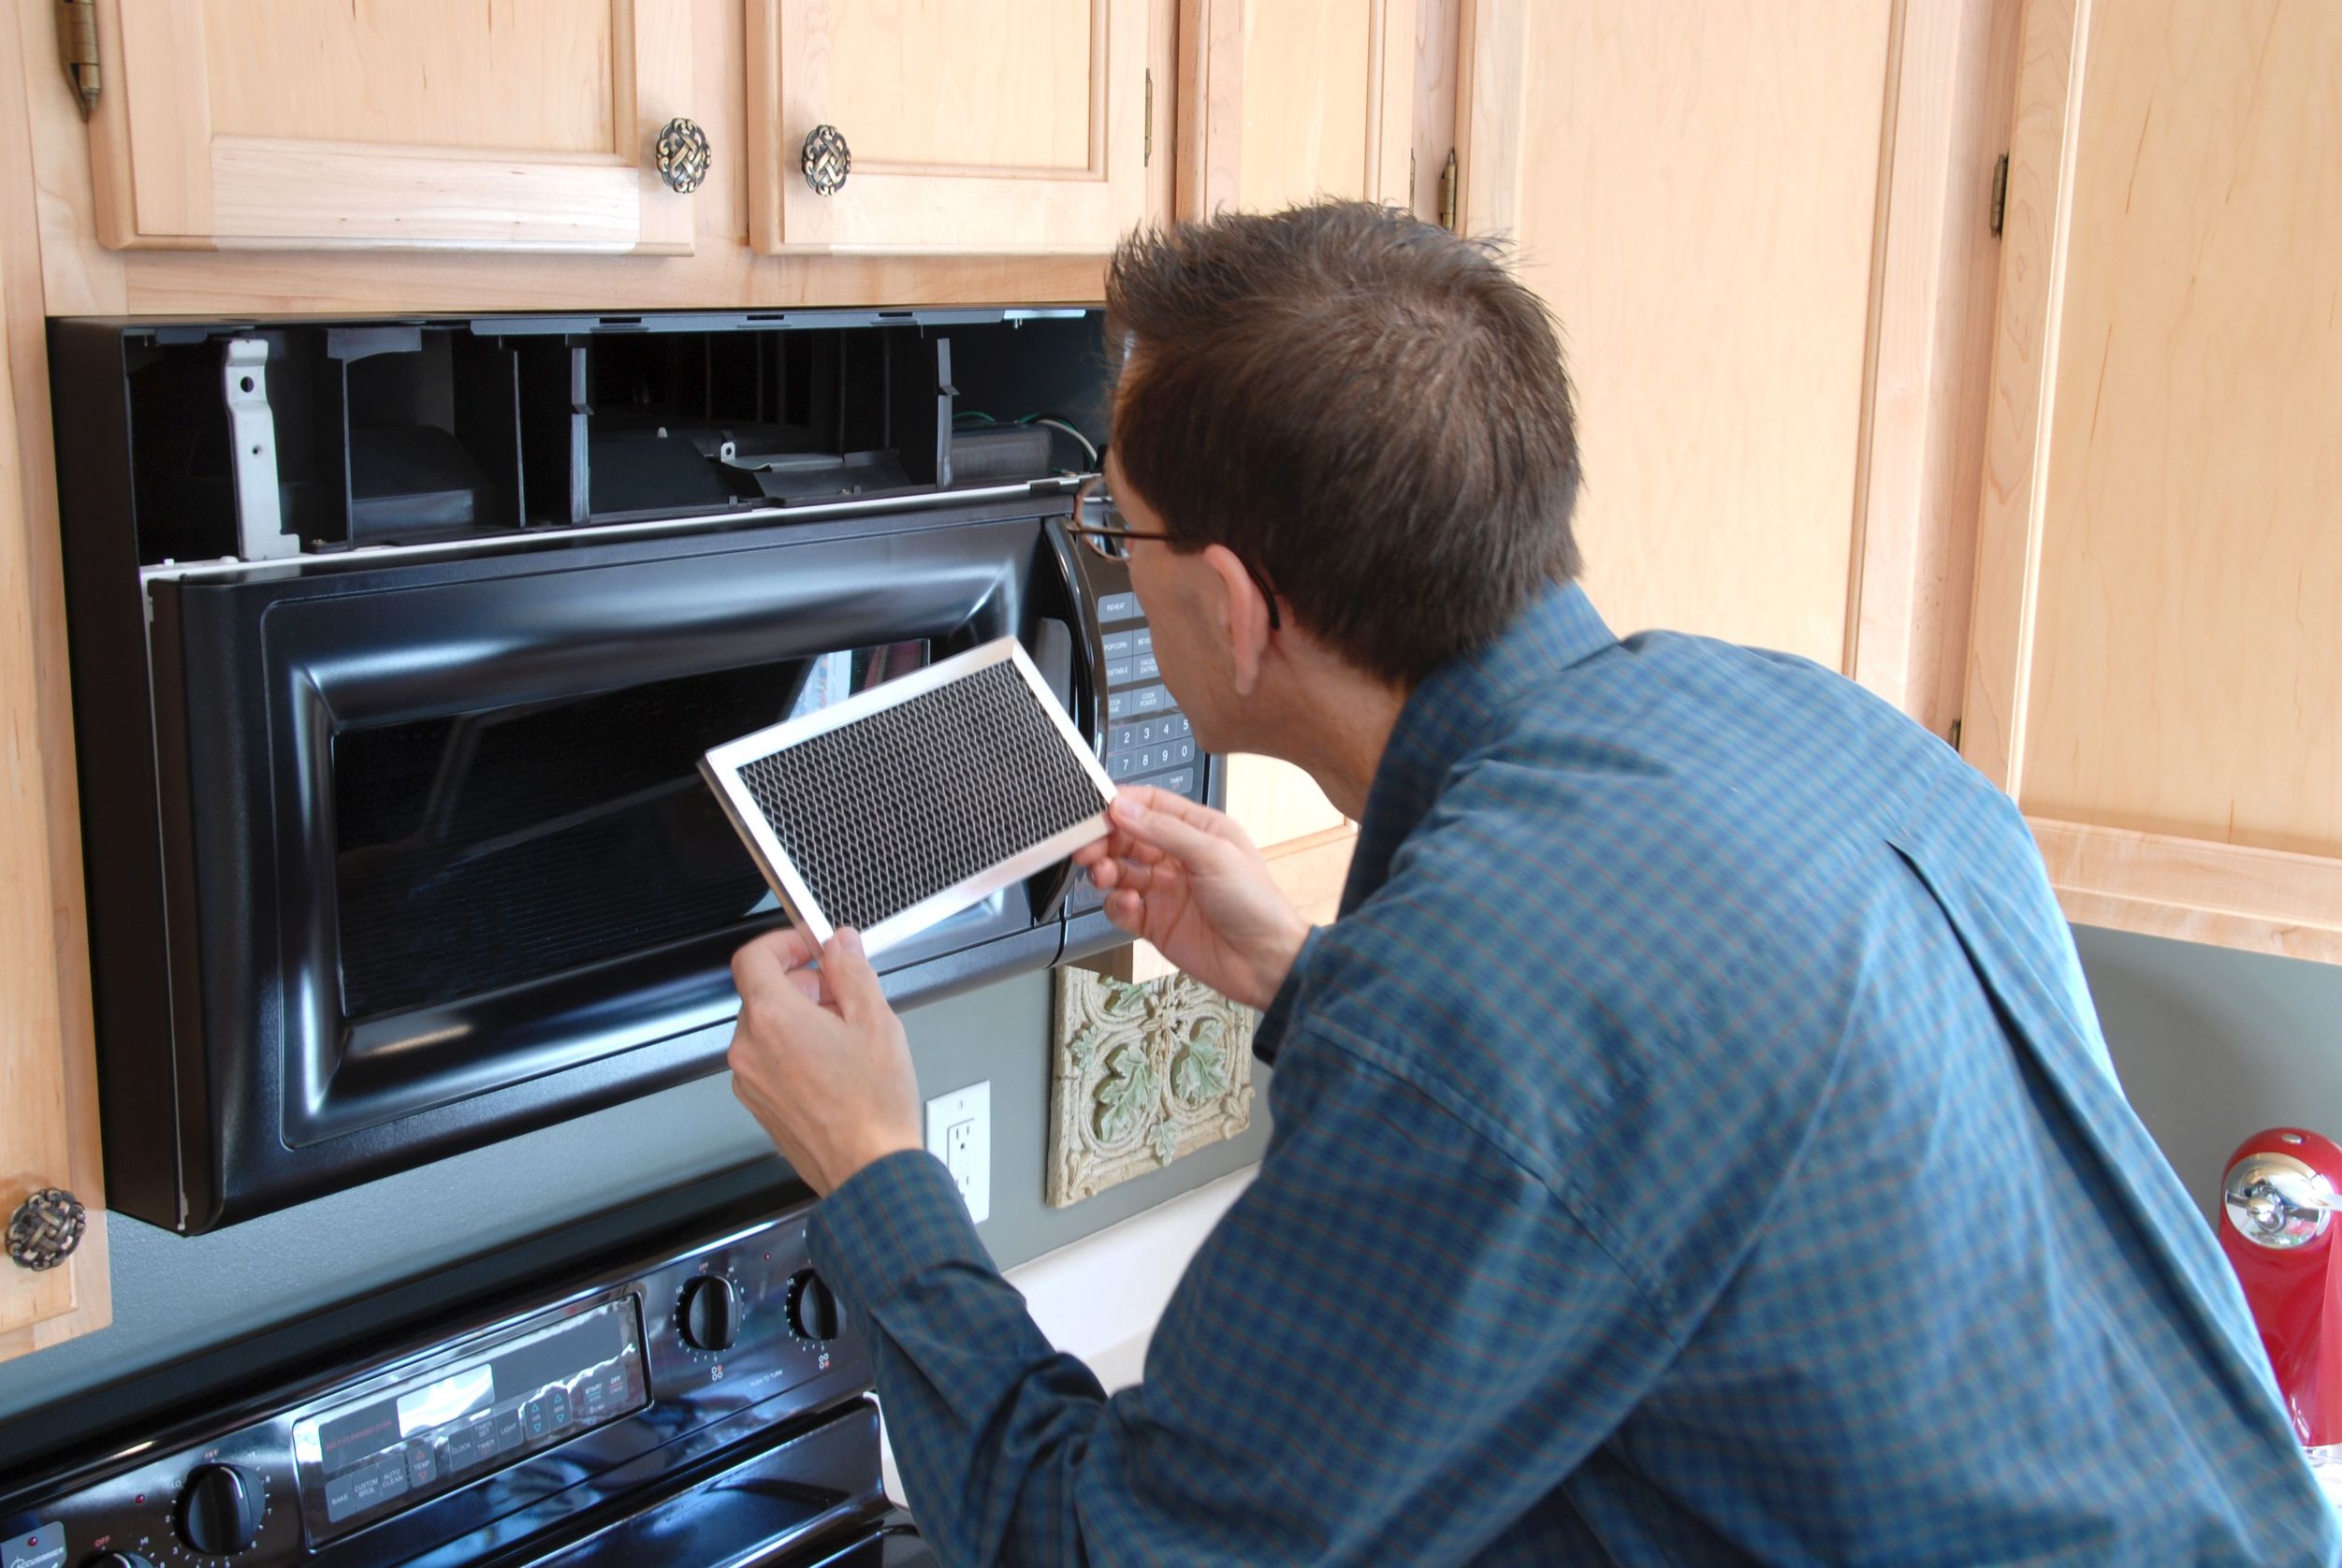 Home Appliance Repair – What Should You Watch Out For